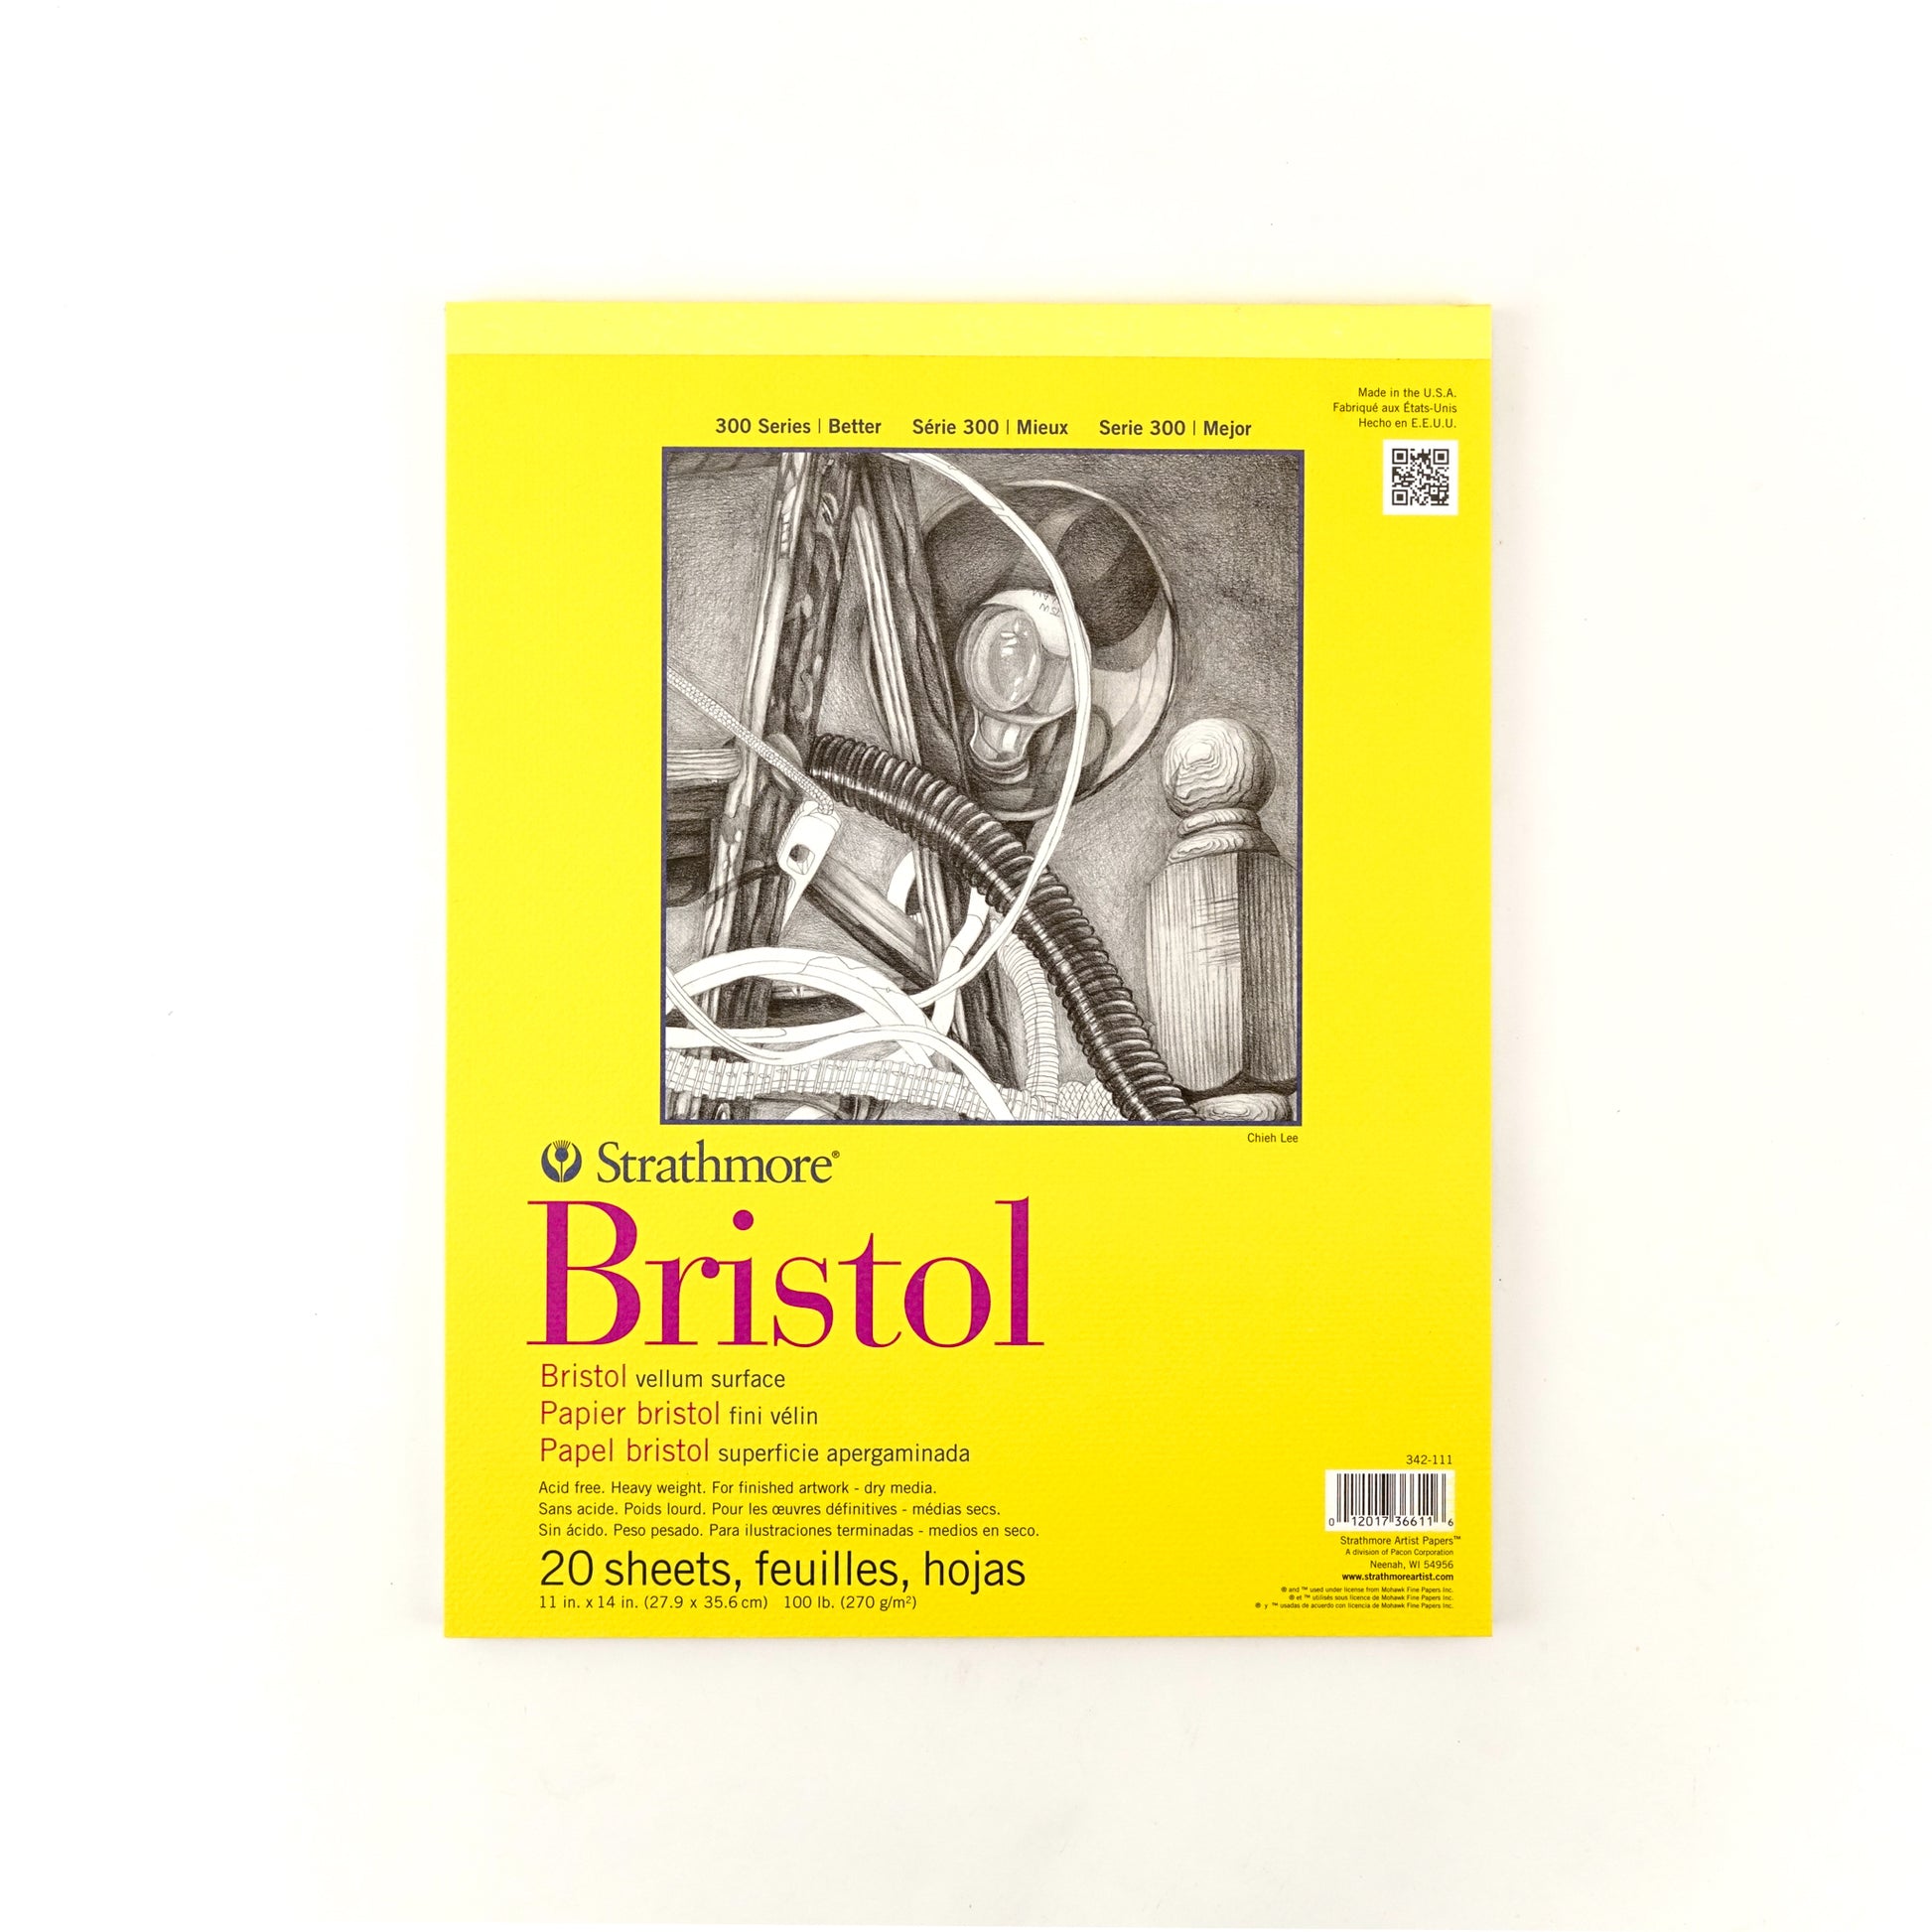 Strathmore 300 Series Bristol Paper Pad - Vellum Surface - 11 x 14 inches by Strathmore - K. A. Artist Shop